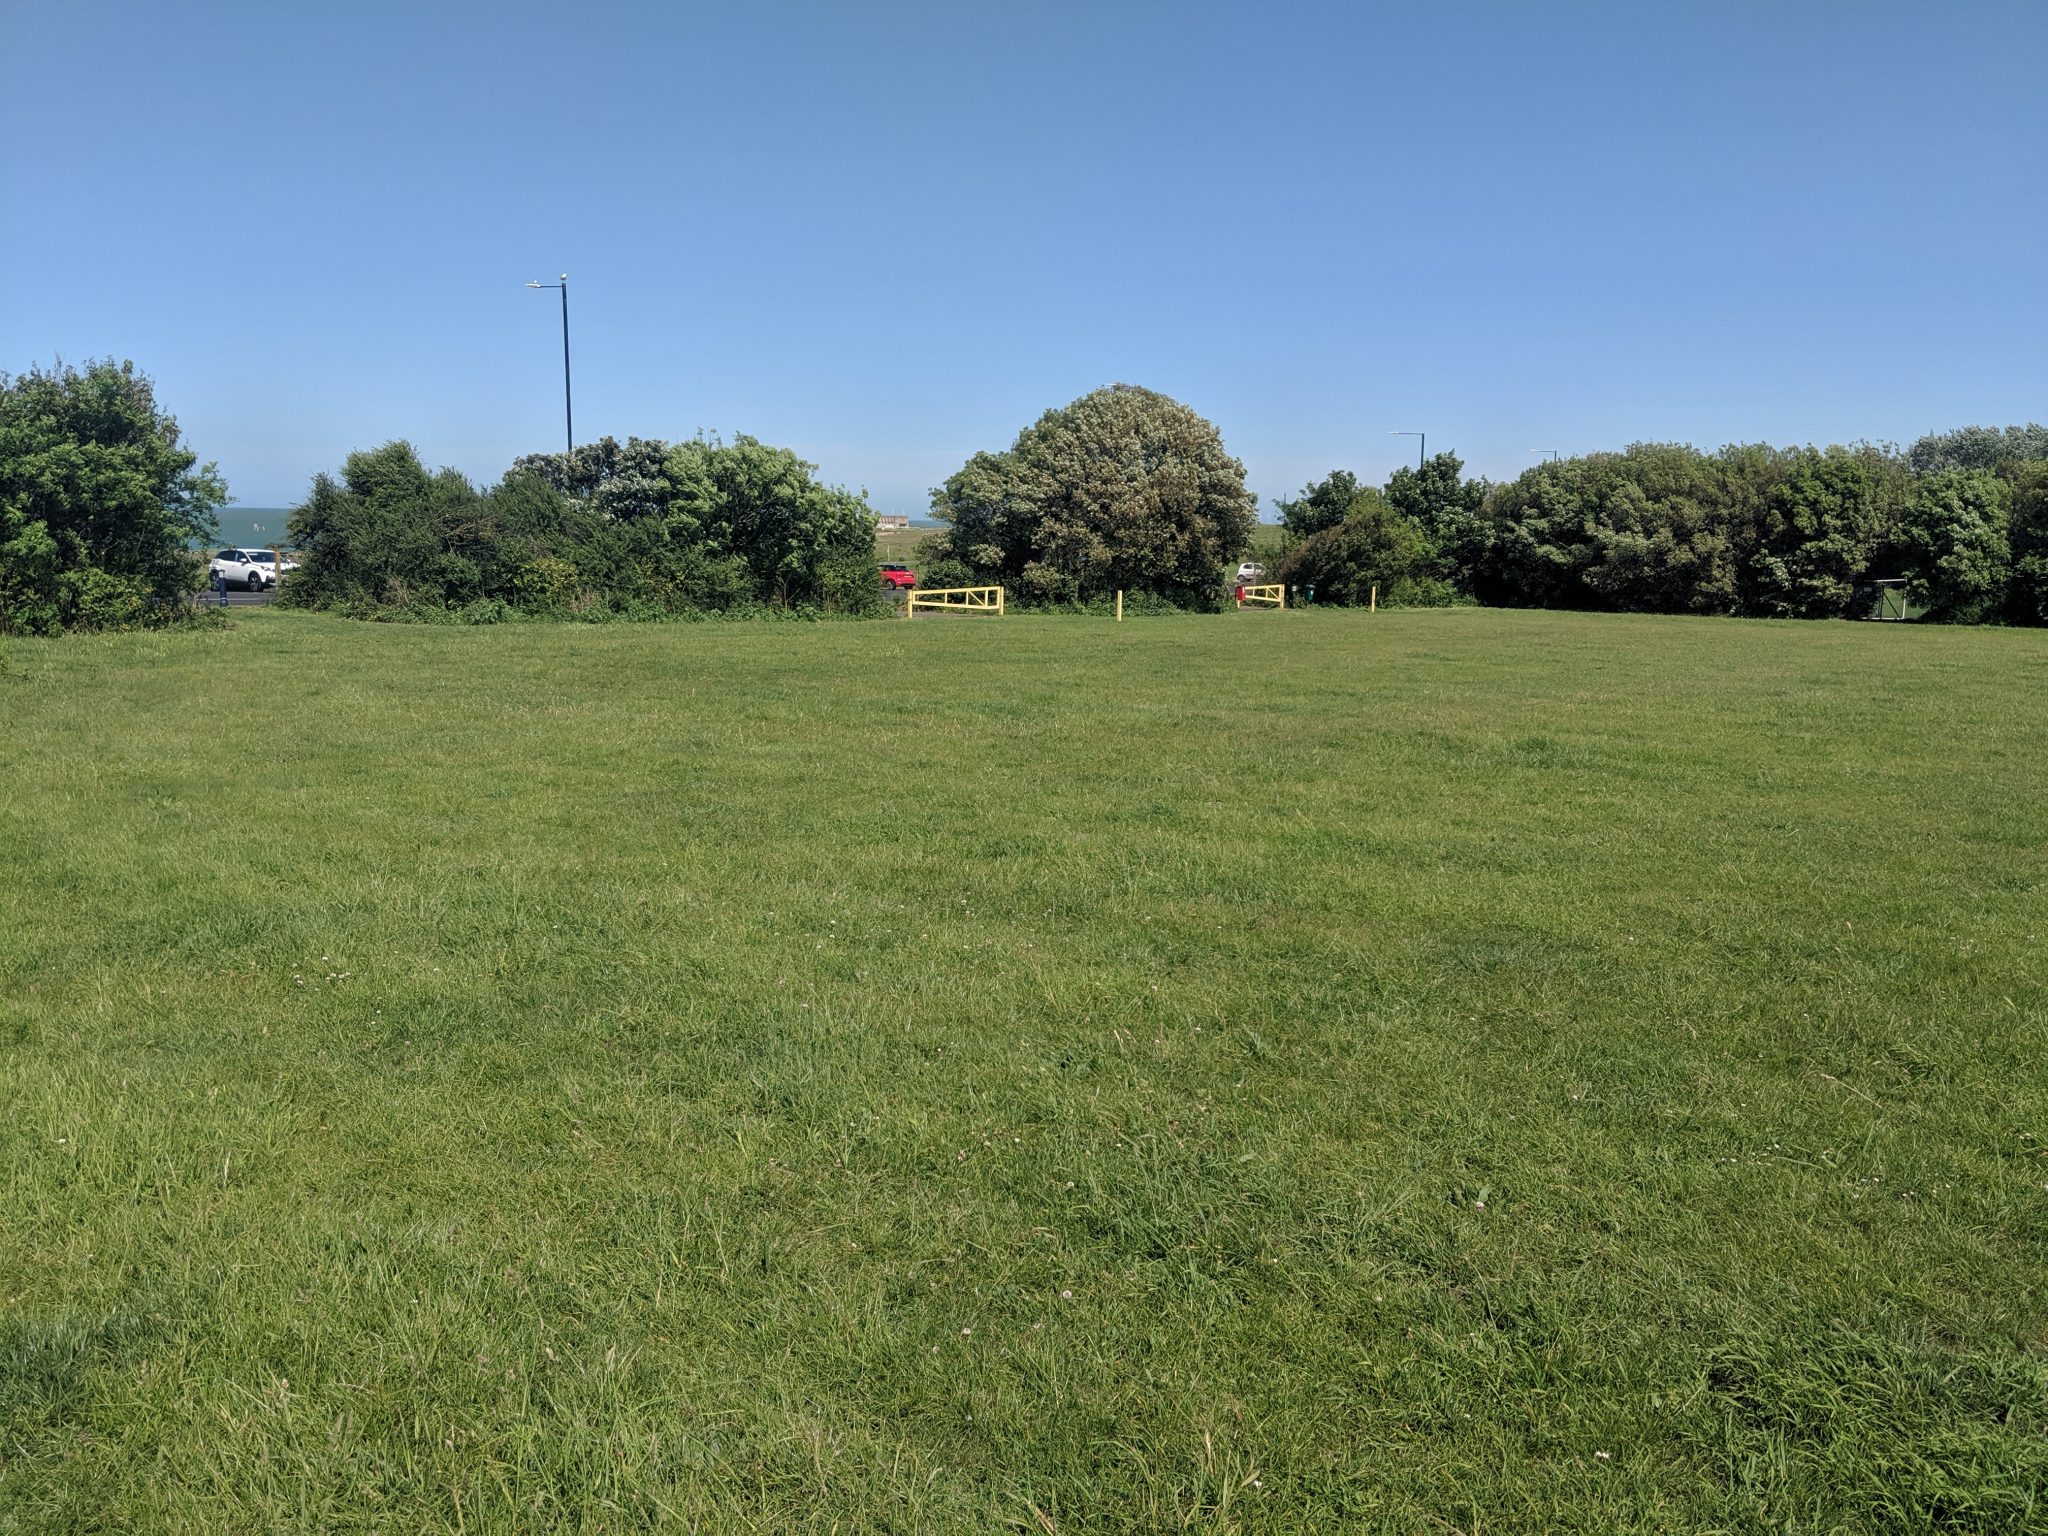 Large green open space area leading to parking area